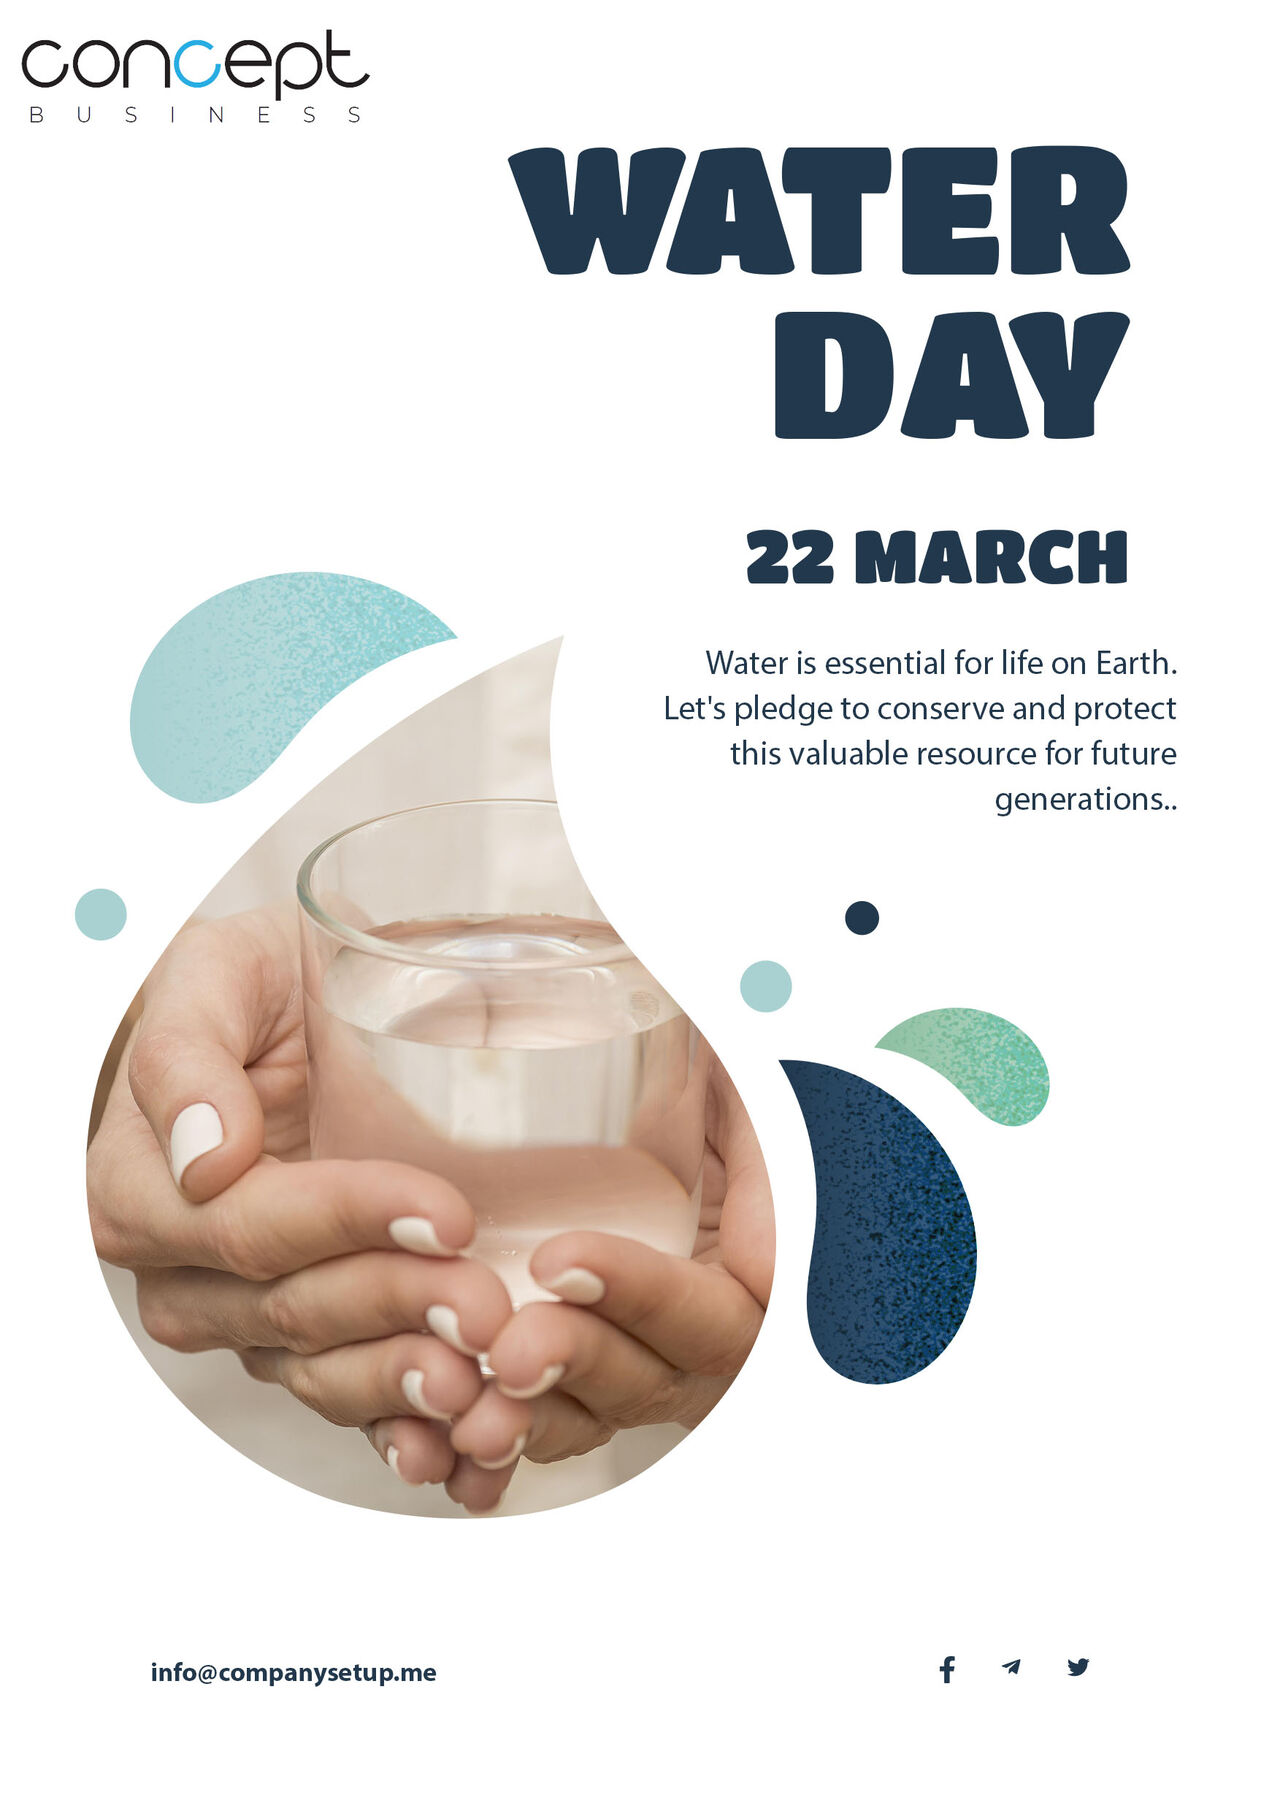 Happy World Water Day! Let's remember to conserve and protect this precious resource for future g...